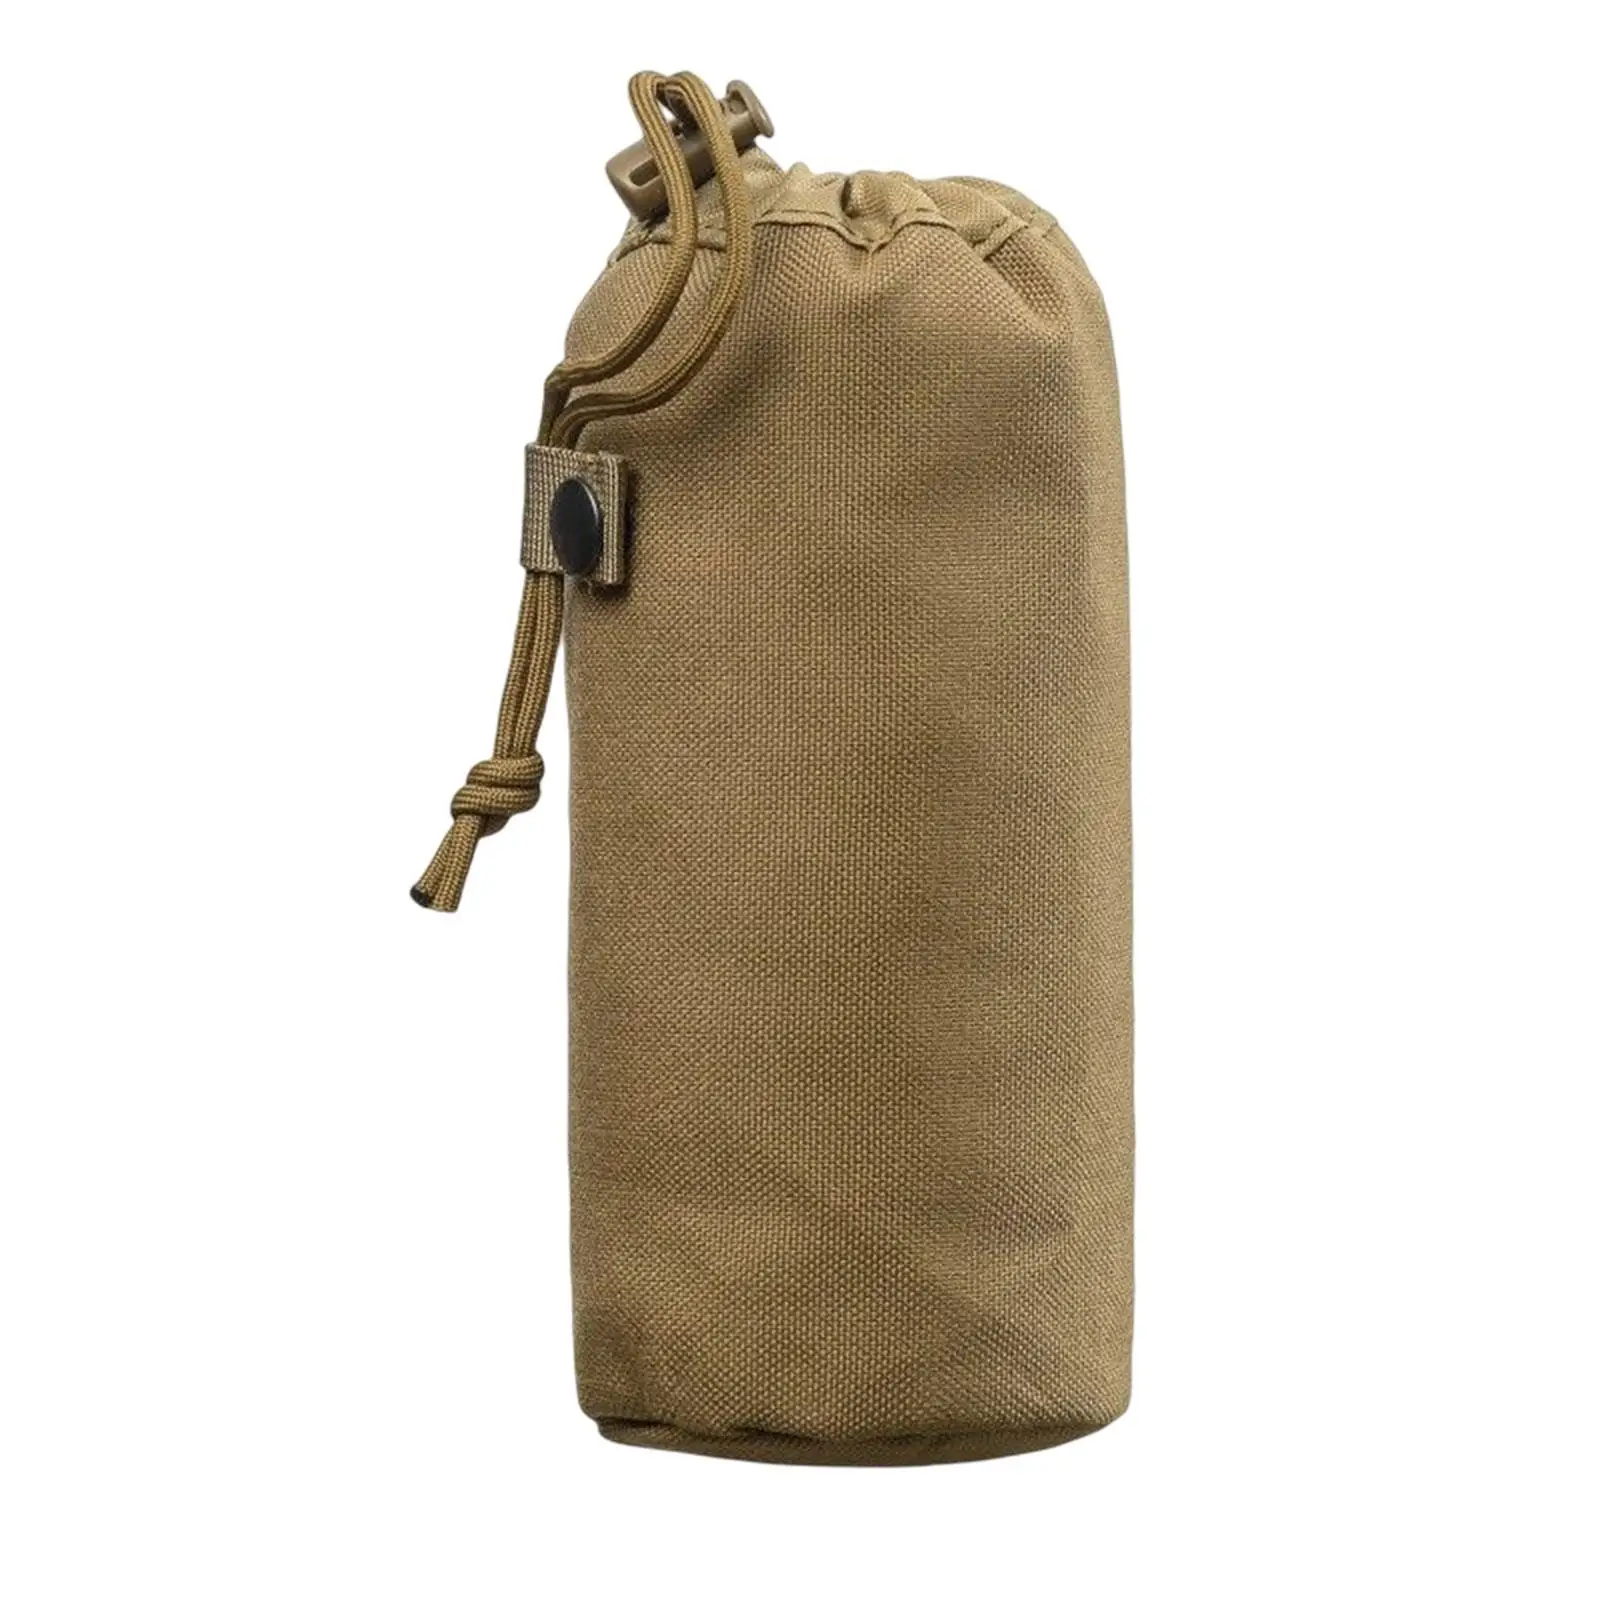 Portable Water Bottle Carrier Bag Drink Bottle Carrying Bag Protective Sleeve Cover Pouch for Outdoor Fishing Camping Hiking